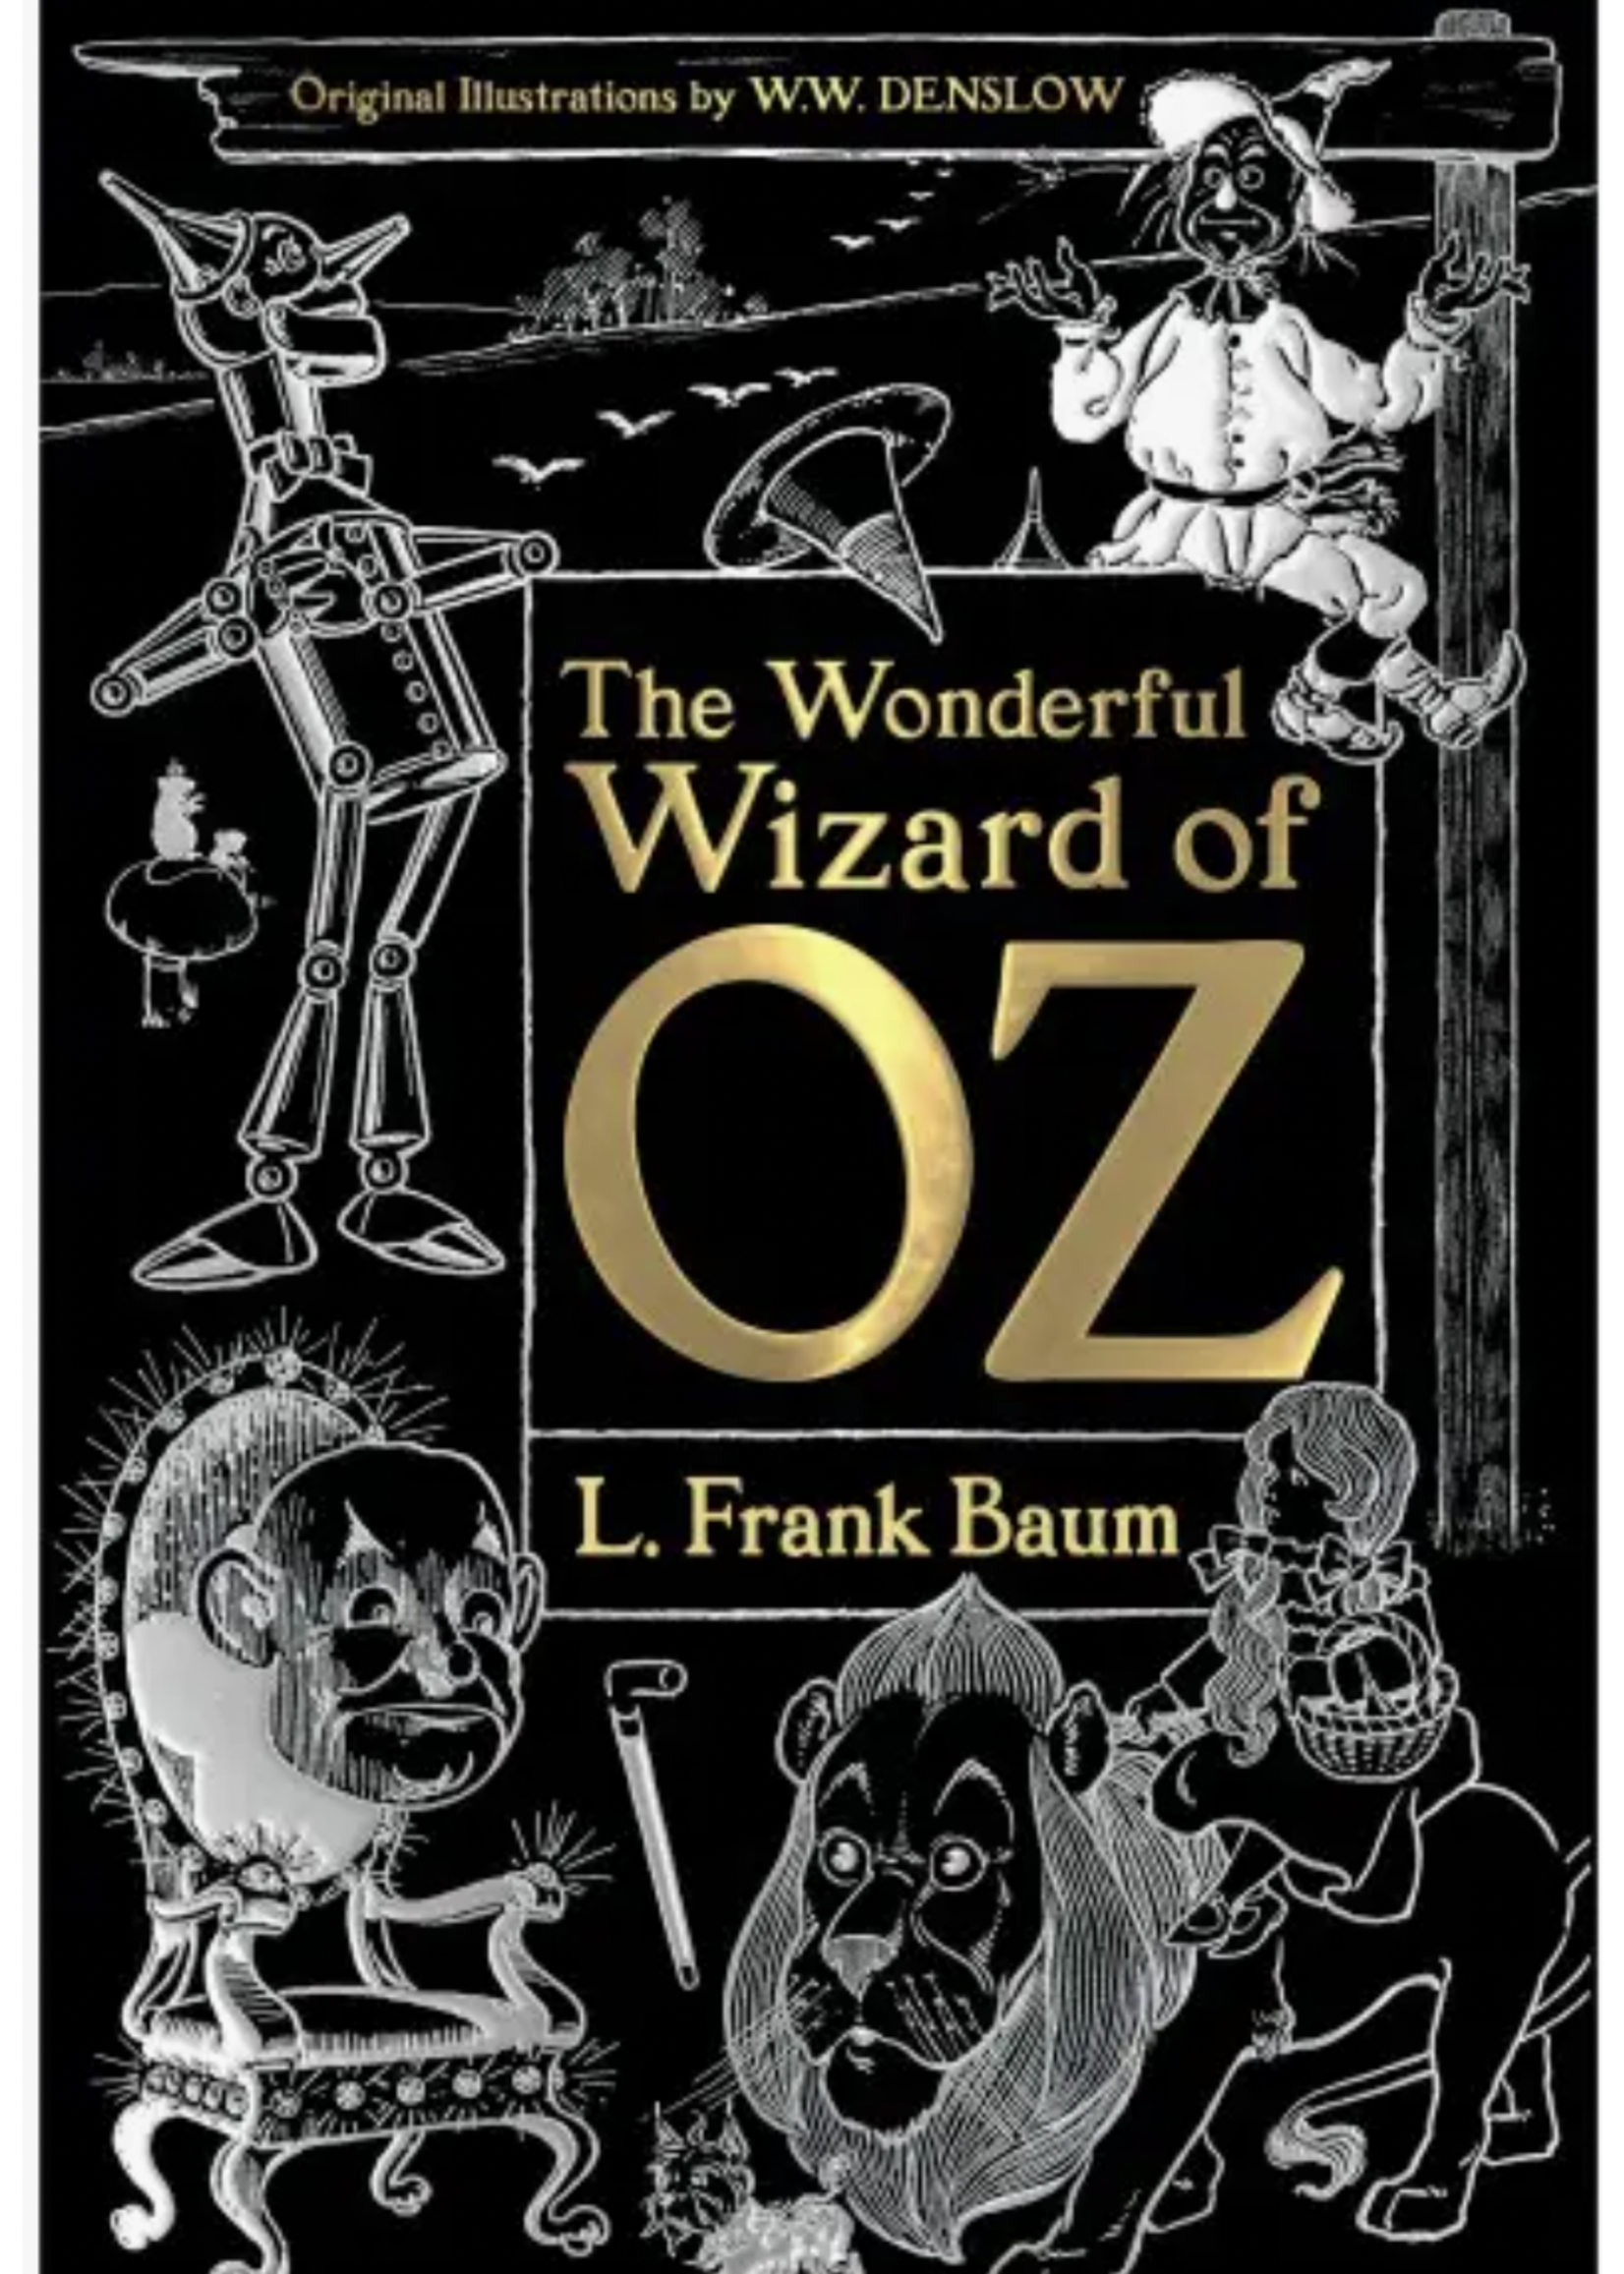 Texas Bookman Wizard Of Oz, Illustrated by W. Denslow